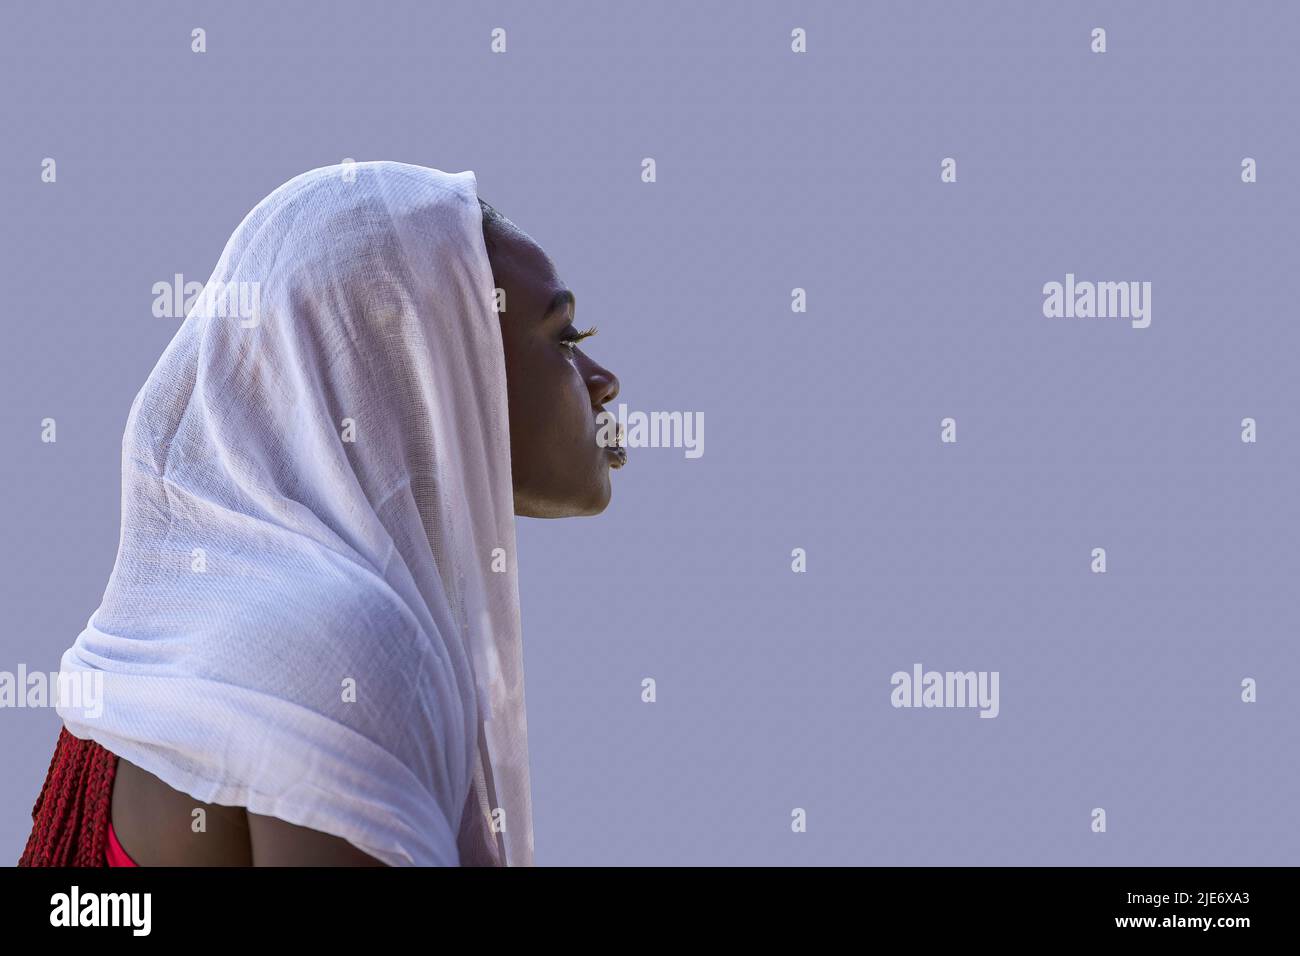 African Ghana woman standing with a white shawl covering her hair Stock Photo